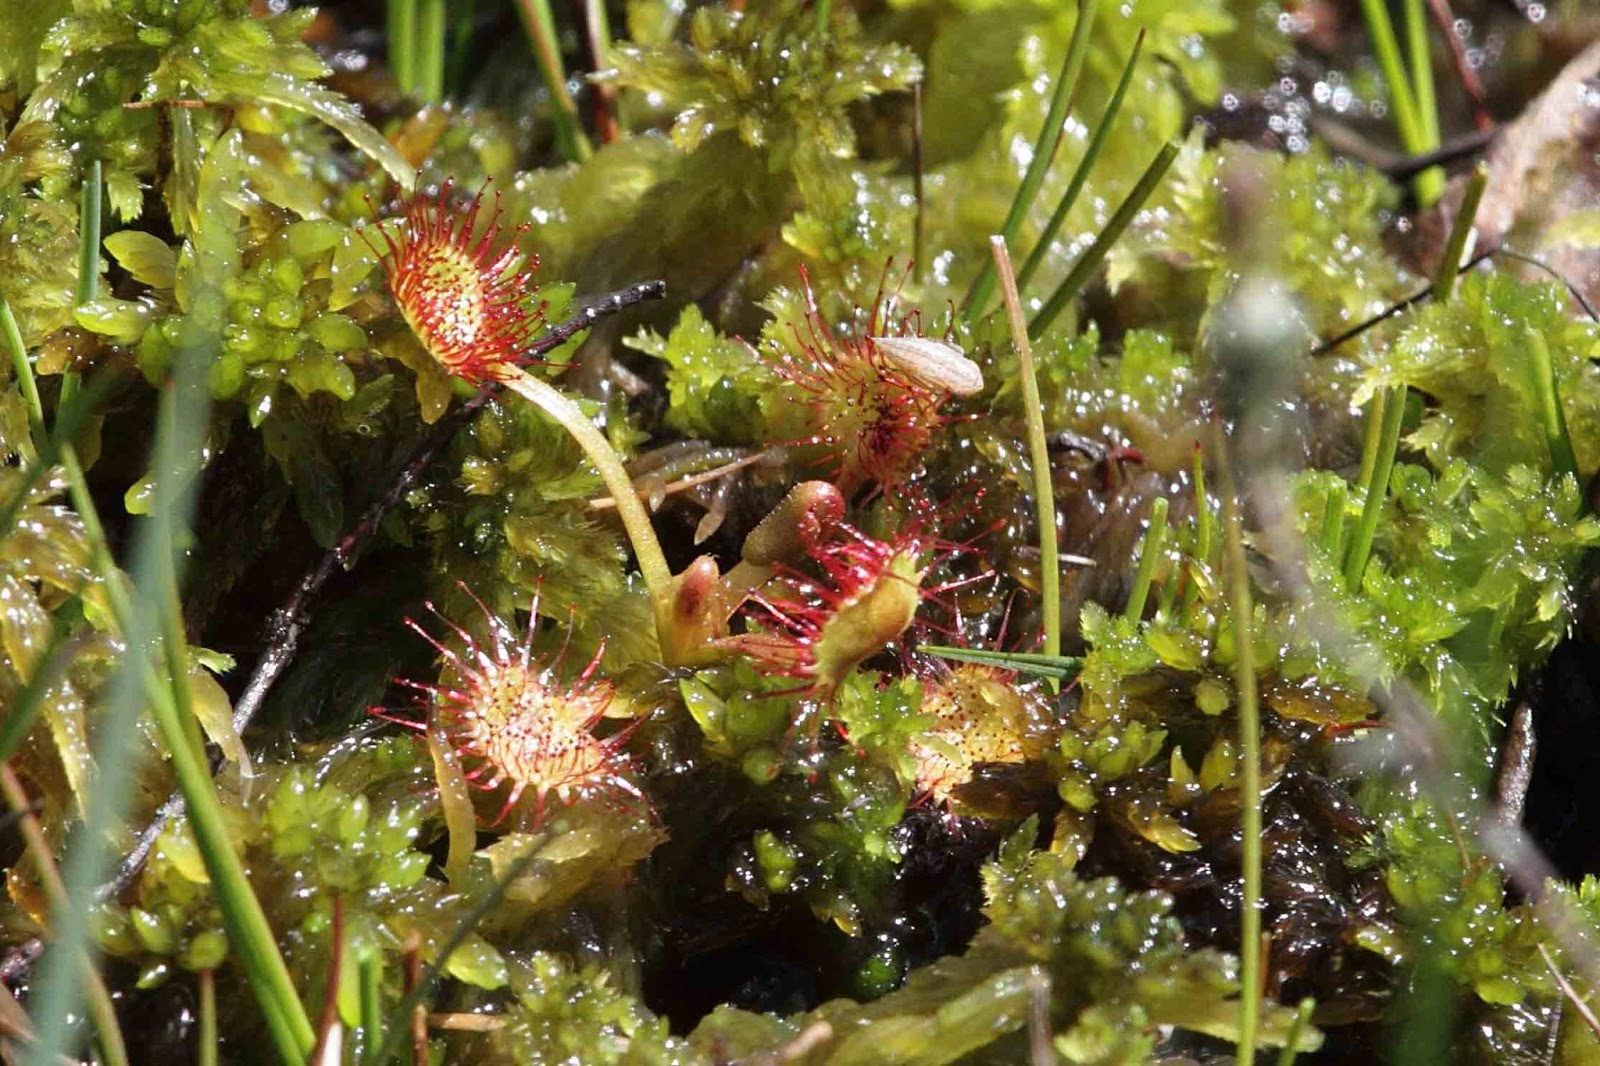 sundew leaved round guess moorland habitat derbyshire due wet availability limited must its which